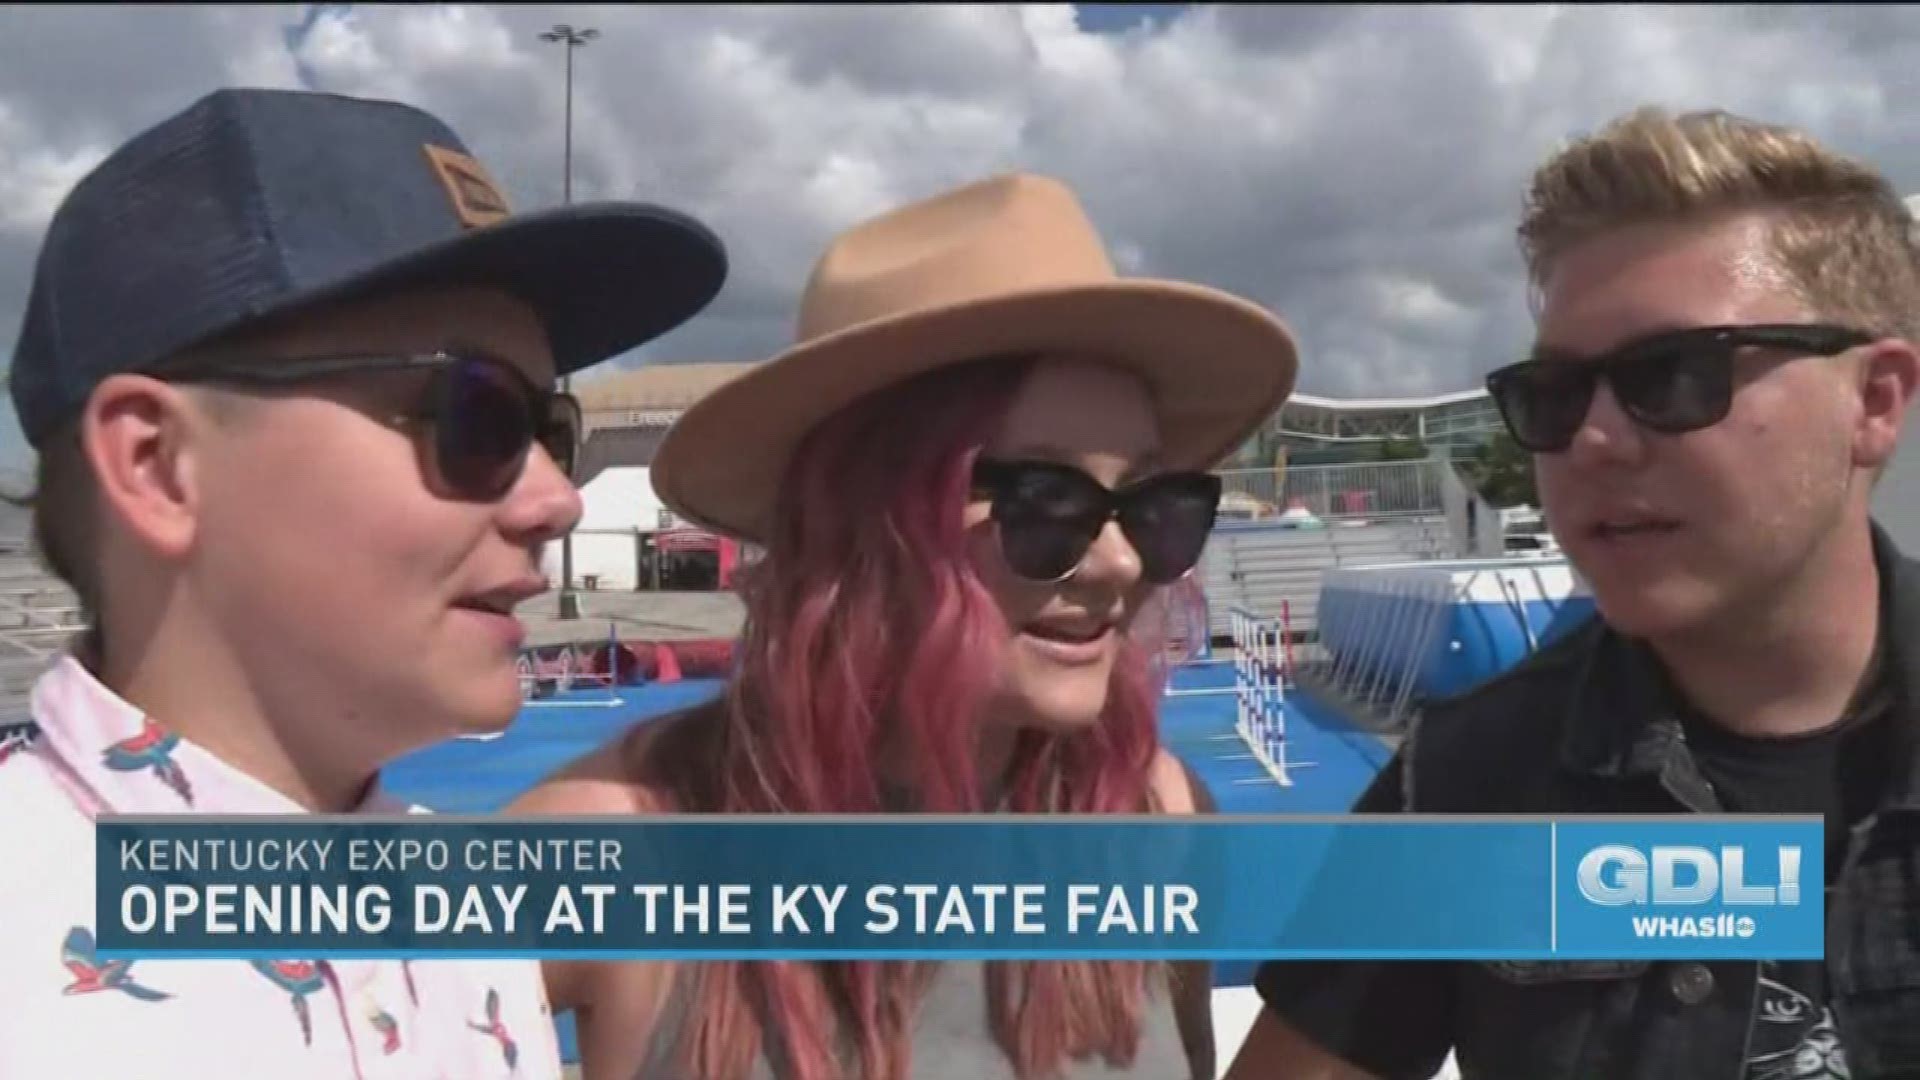 The Kentucky State Fair is August 15-25, 2019. For more information, go to KYStateFair.org.